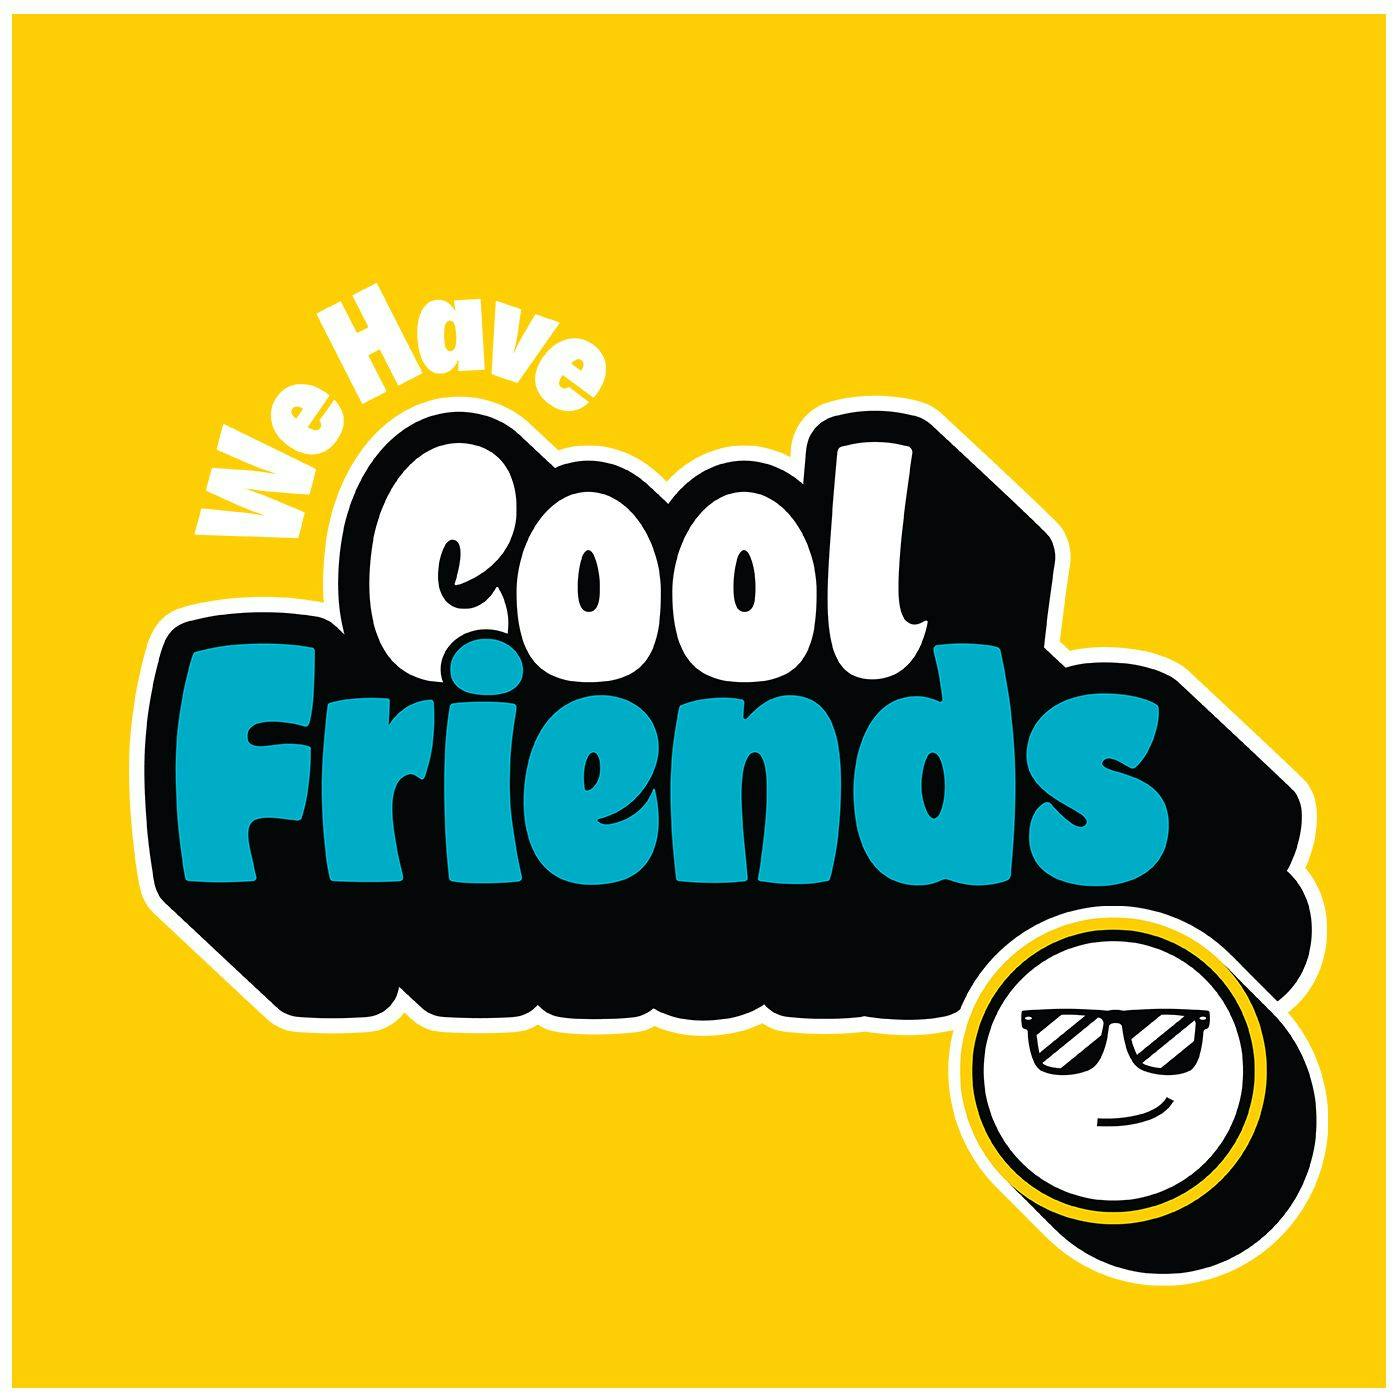 Disney World's Star-Lord Andrew McLean - We Have Cool Friends(Ad-Free)